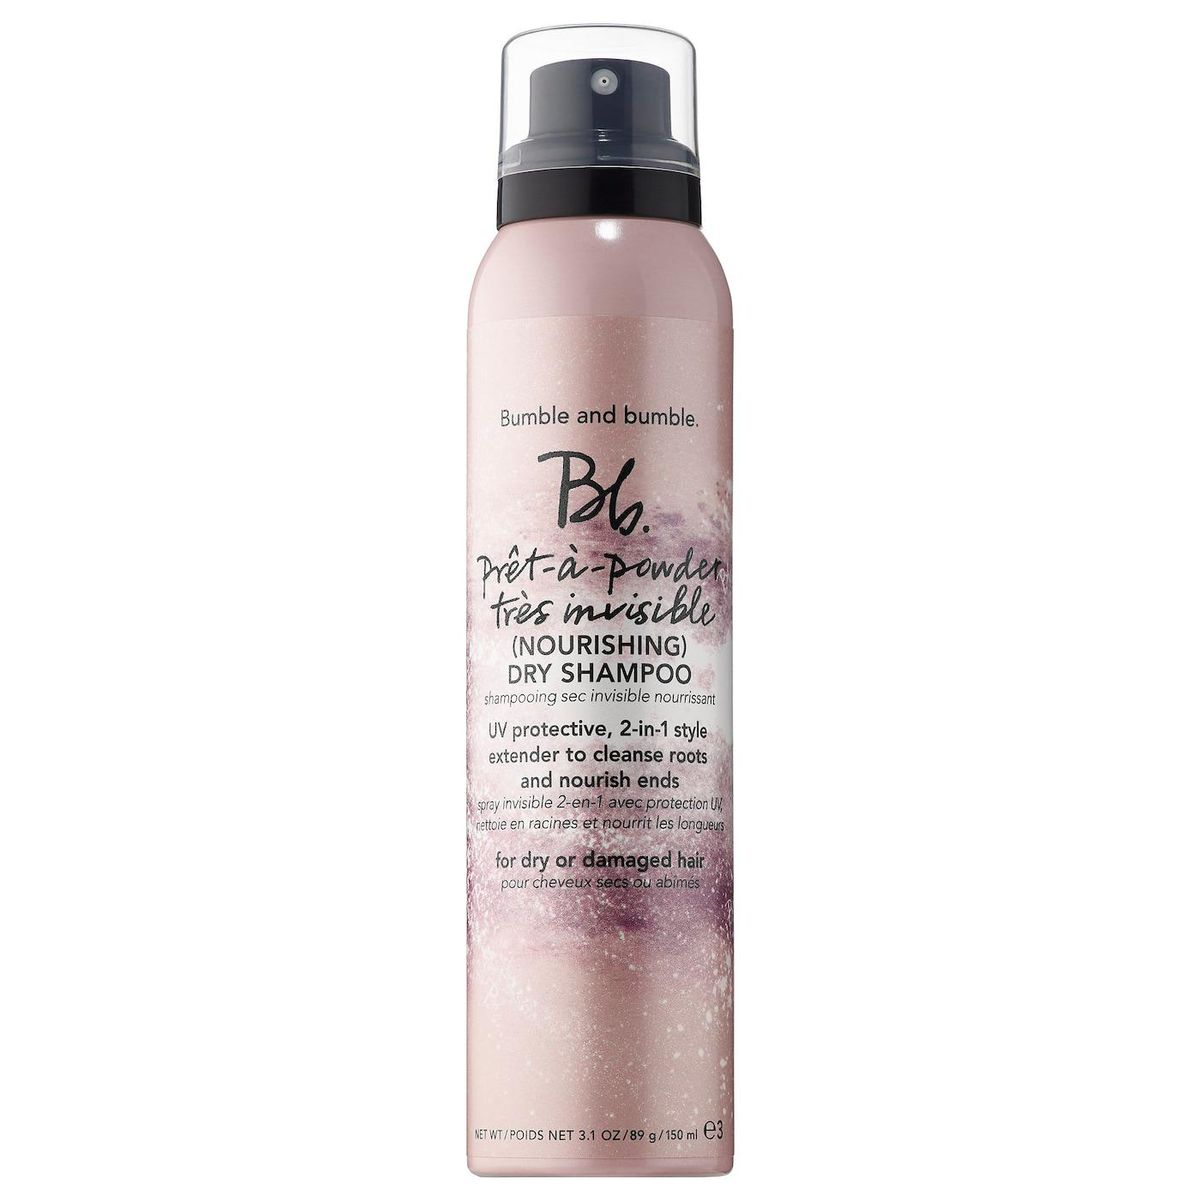 bumble and bumble bb pret a powder tres invisible nourishing dry shampoo with hibiscus extract